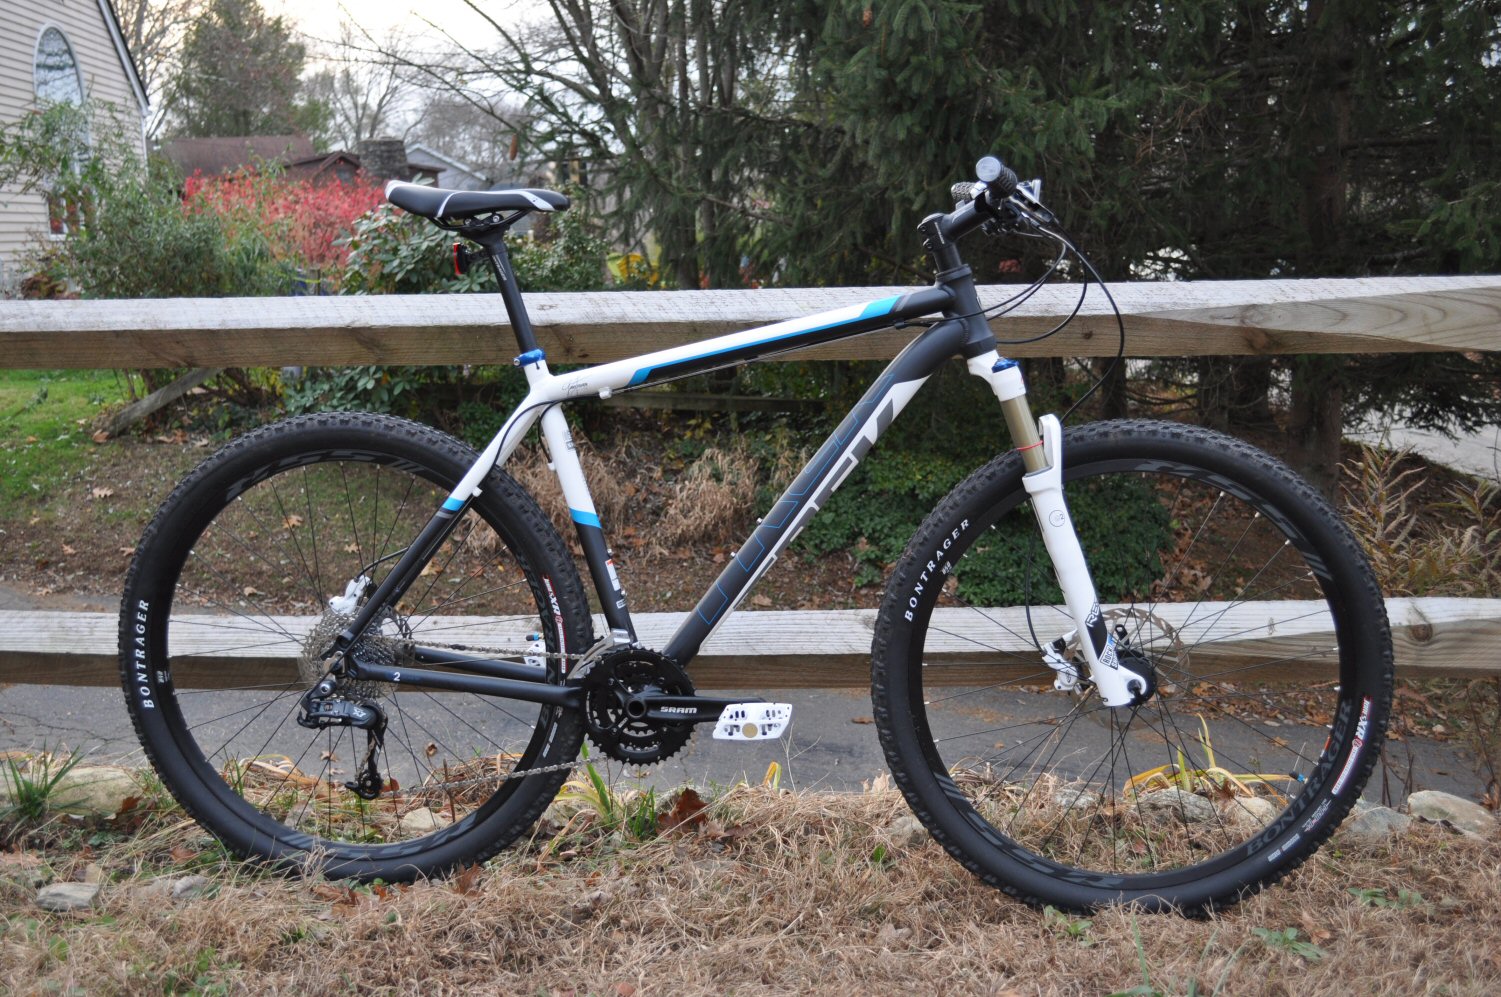 Two Wheels and a fat guy: My Trek X-Caliber